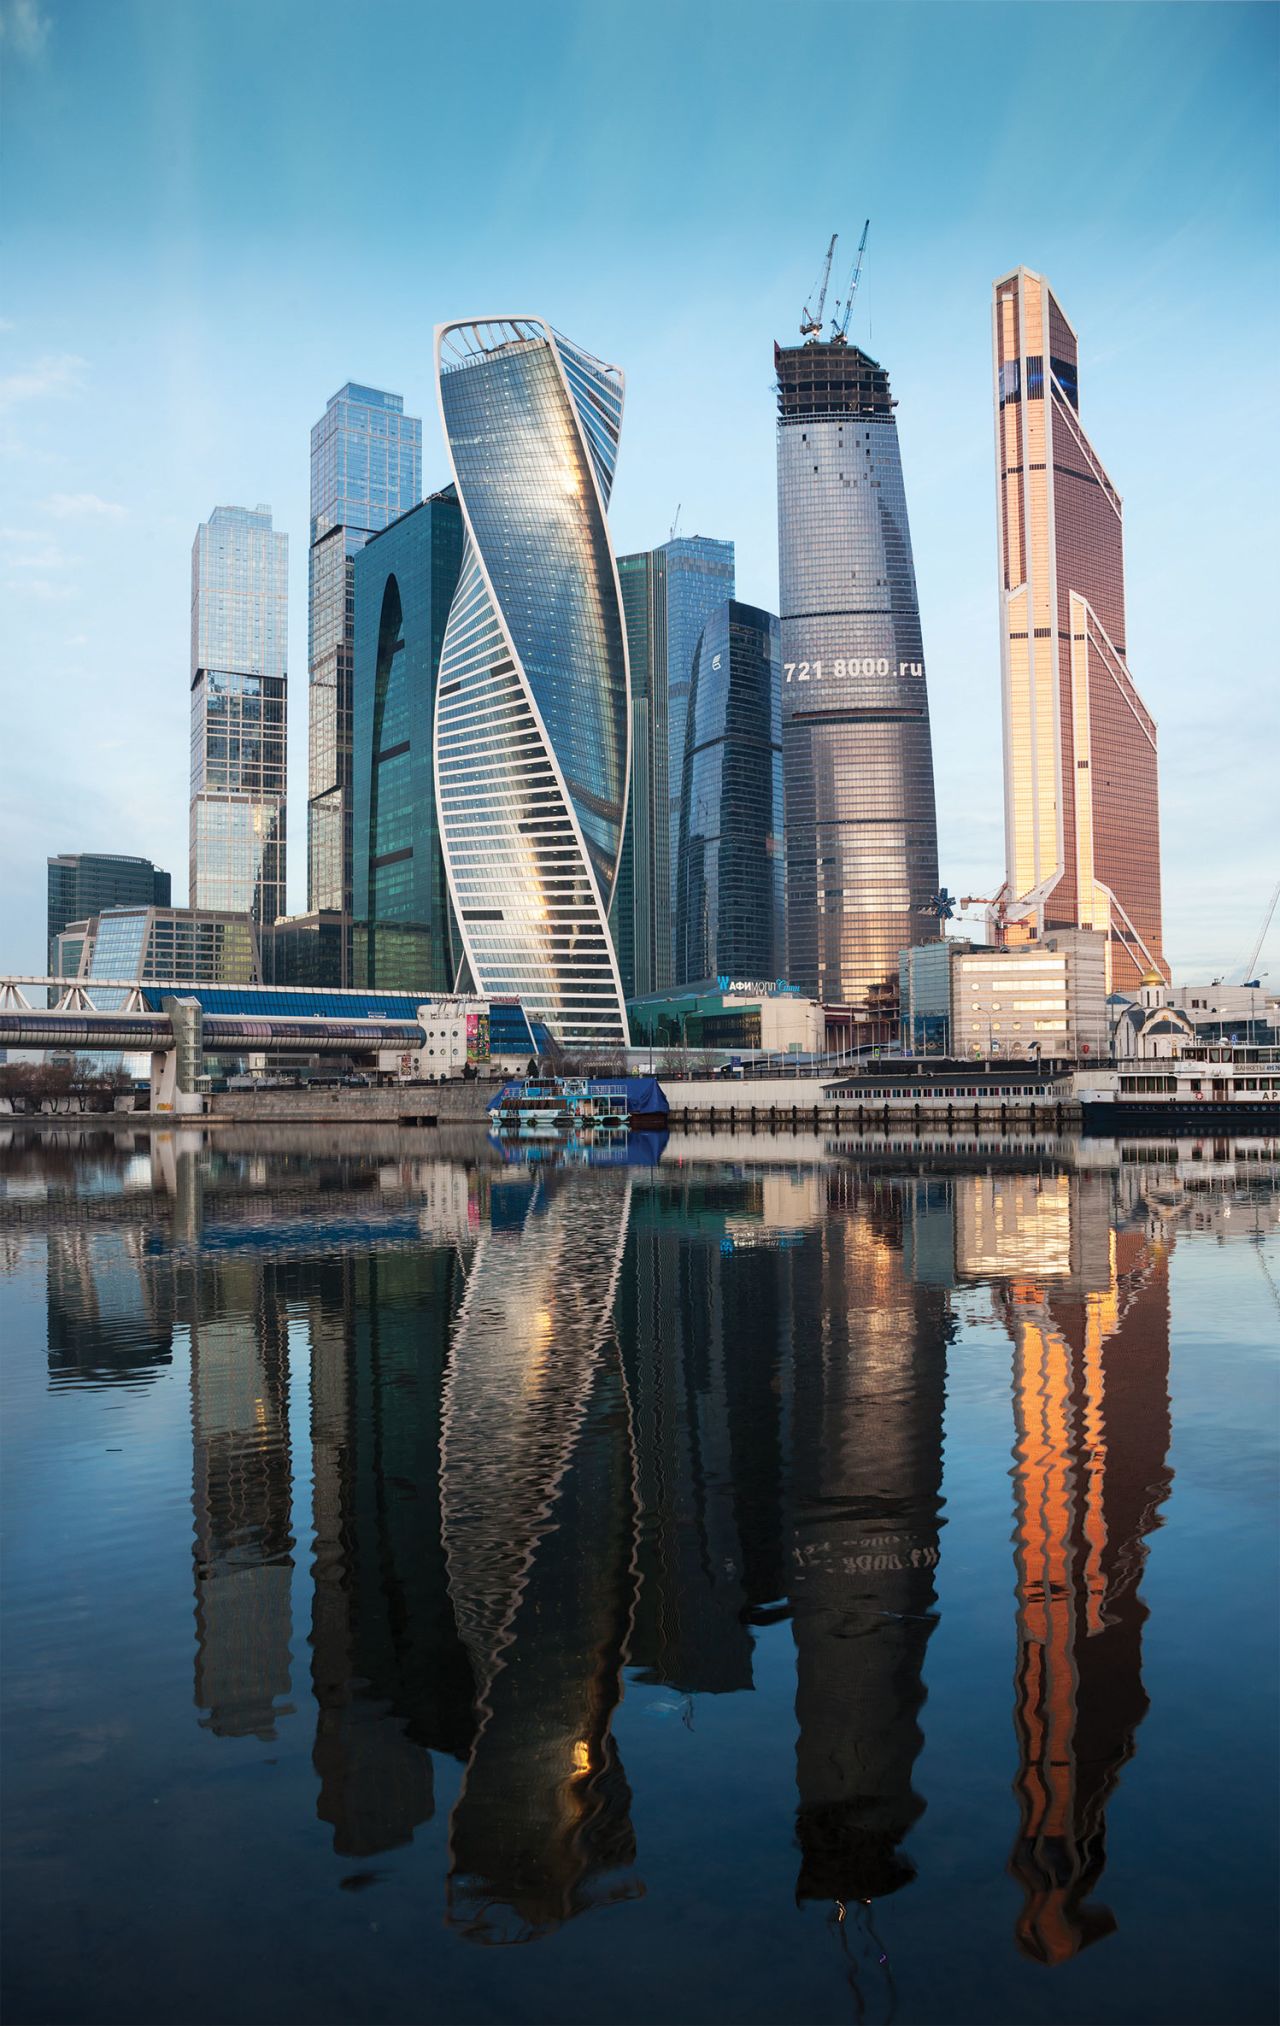 The Council of Tall Buildings and Urban Habitat (CTBUH) has released a comprehensive list of the world's twisting tall buildings that are either completed or under construction. From Shanghai to Dubai, CNN takes a look at these spectacular spiraled skyscrapers, as well as some of the other tallest buildings in the world. 